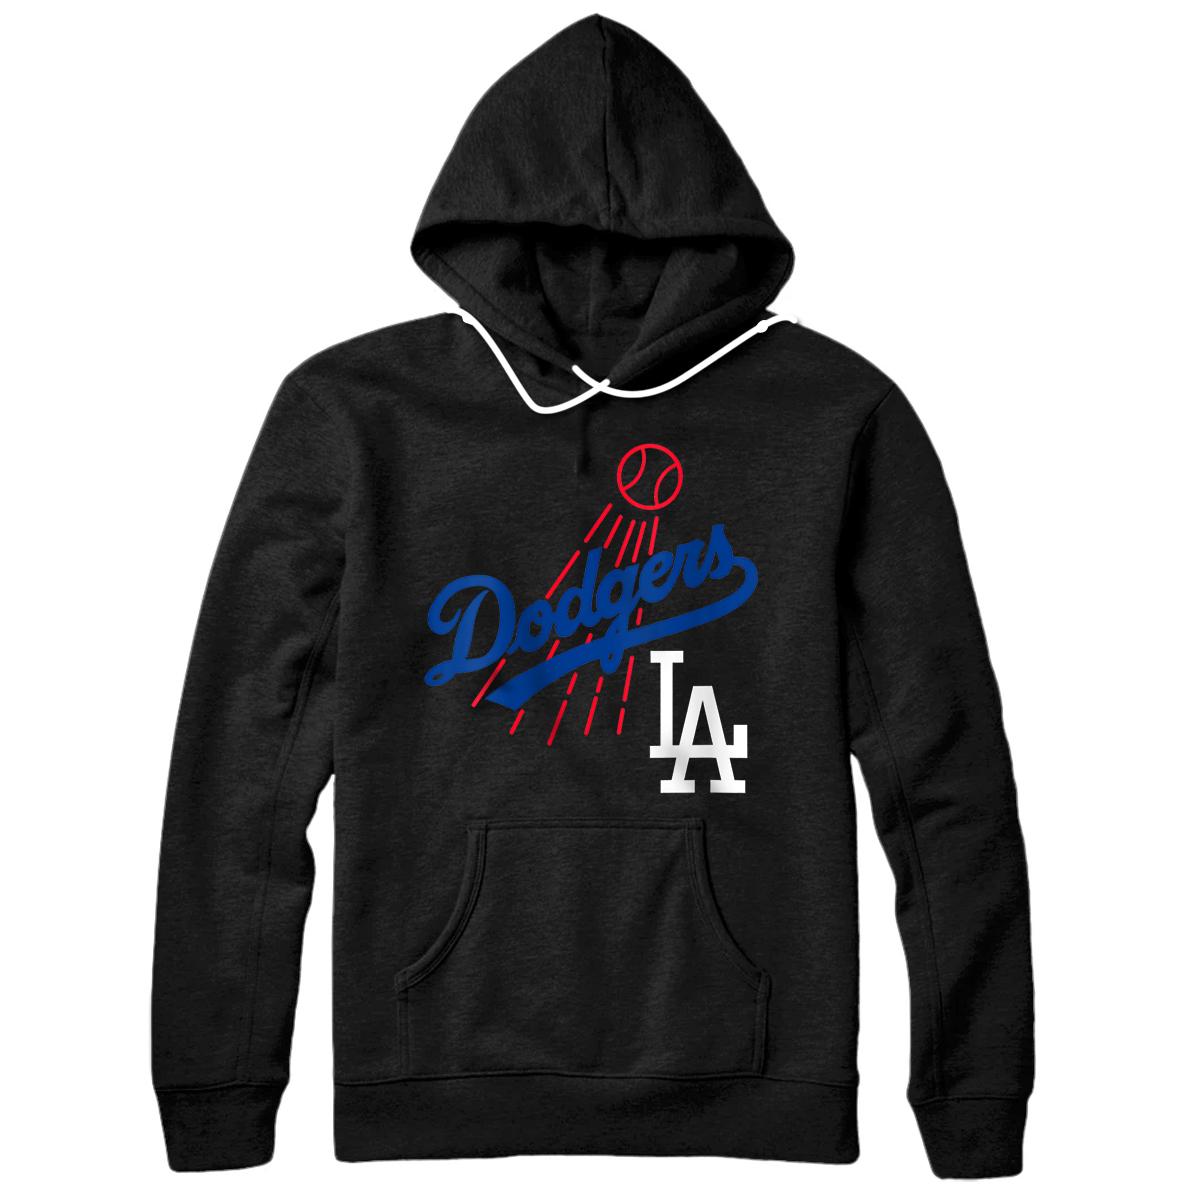 Personalized dodgers-world-series-2020 Pullover Hoodie